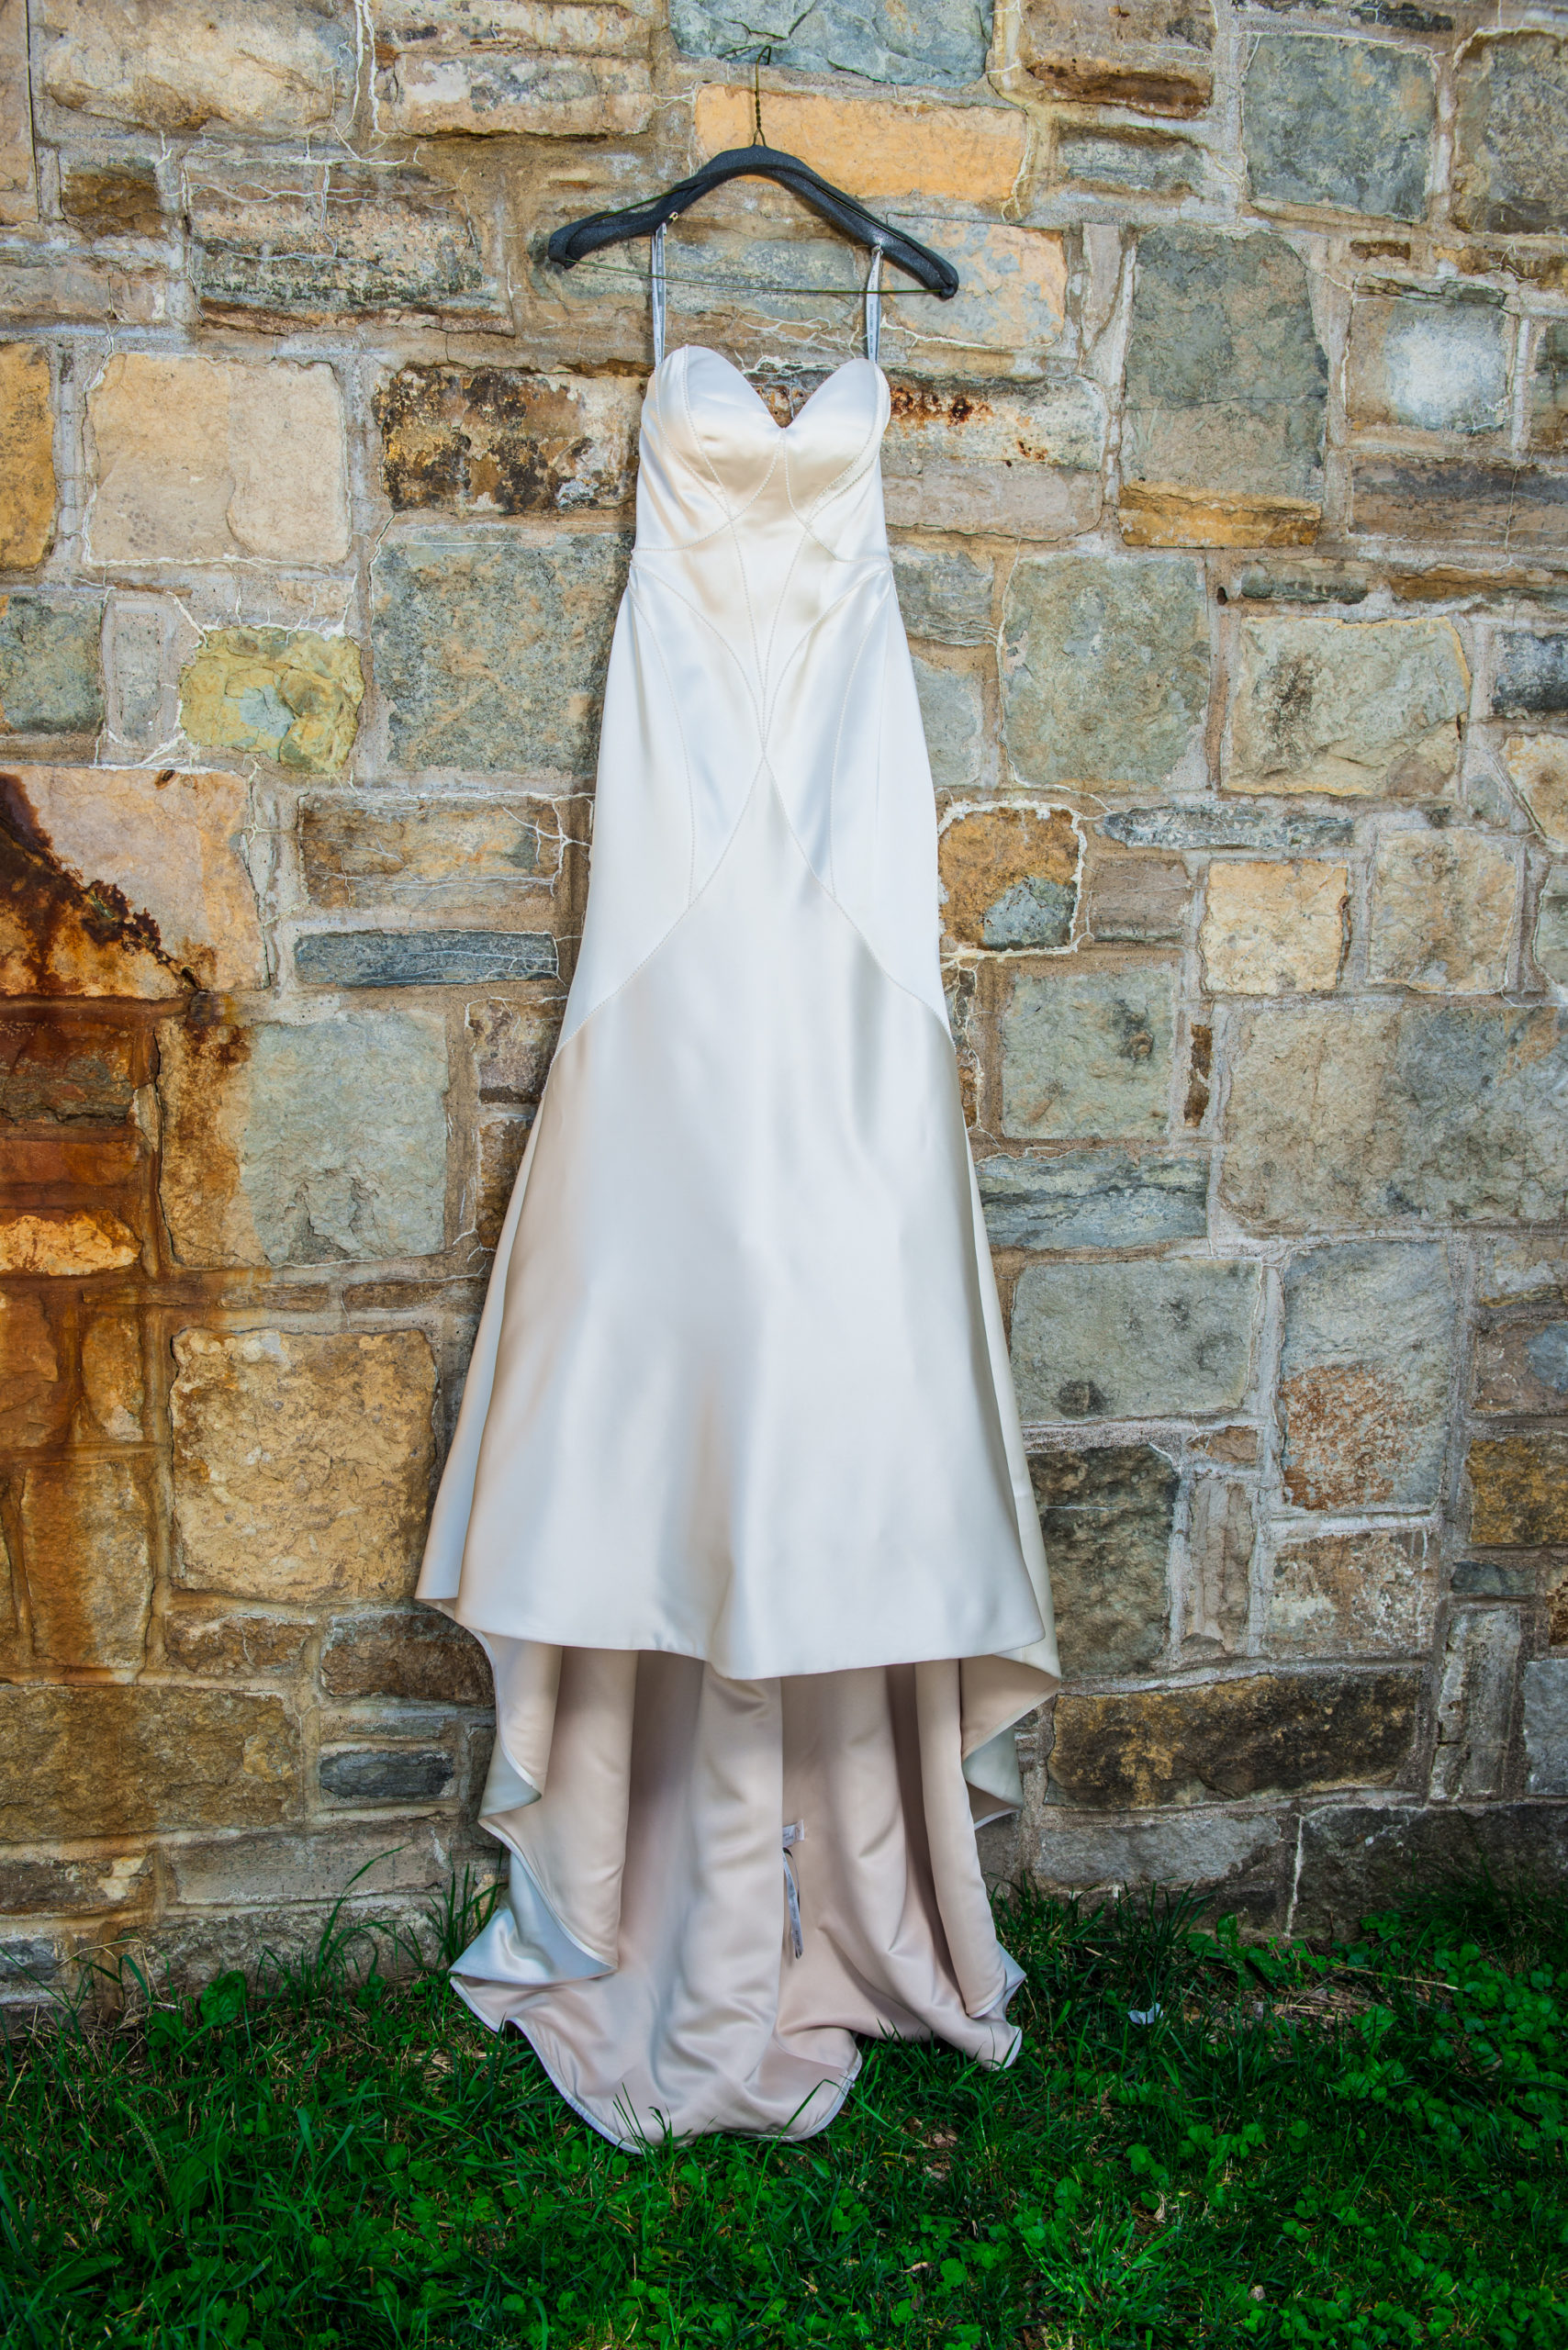 Wedding dress hanging on stone wall at Carpenter Nature Center in Hastings, Minnesota.